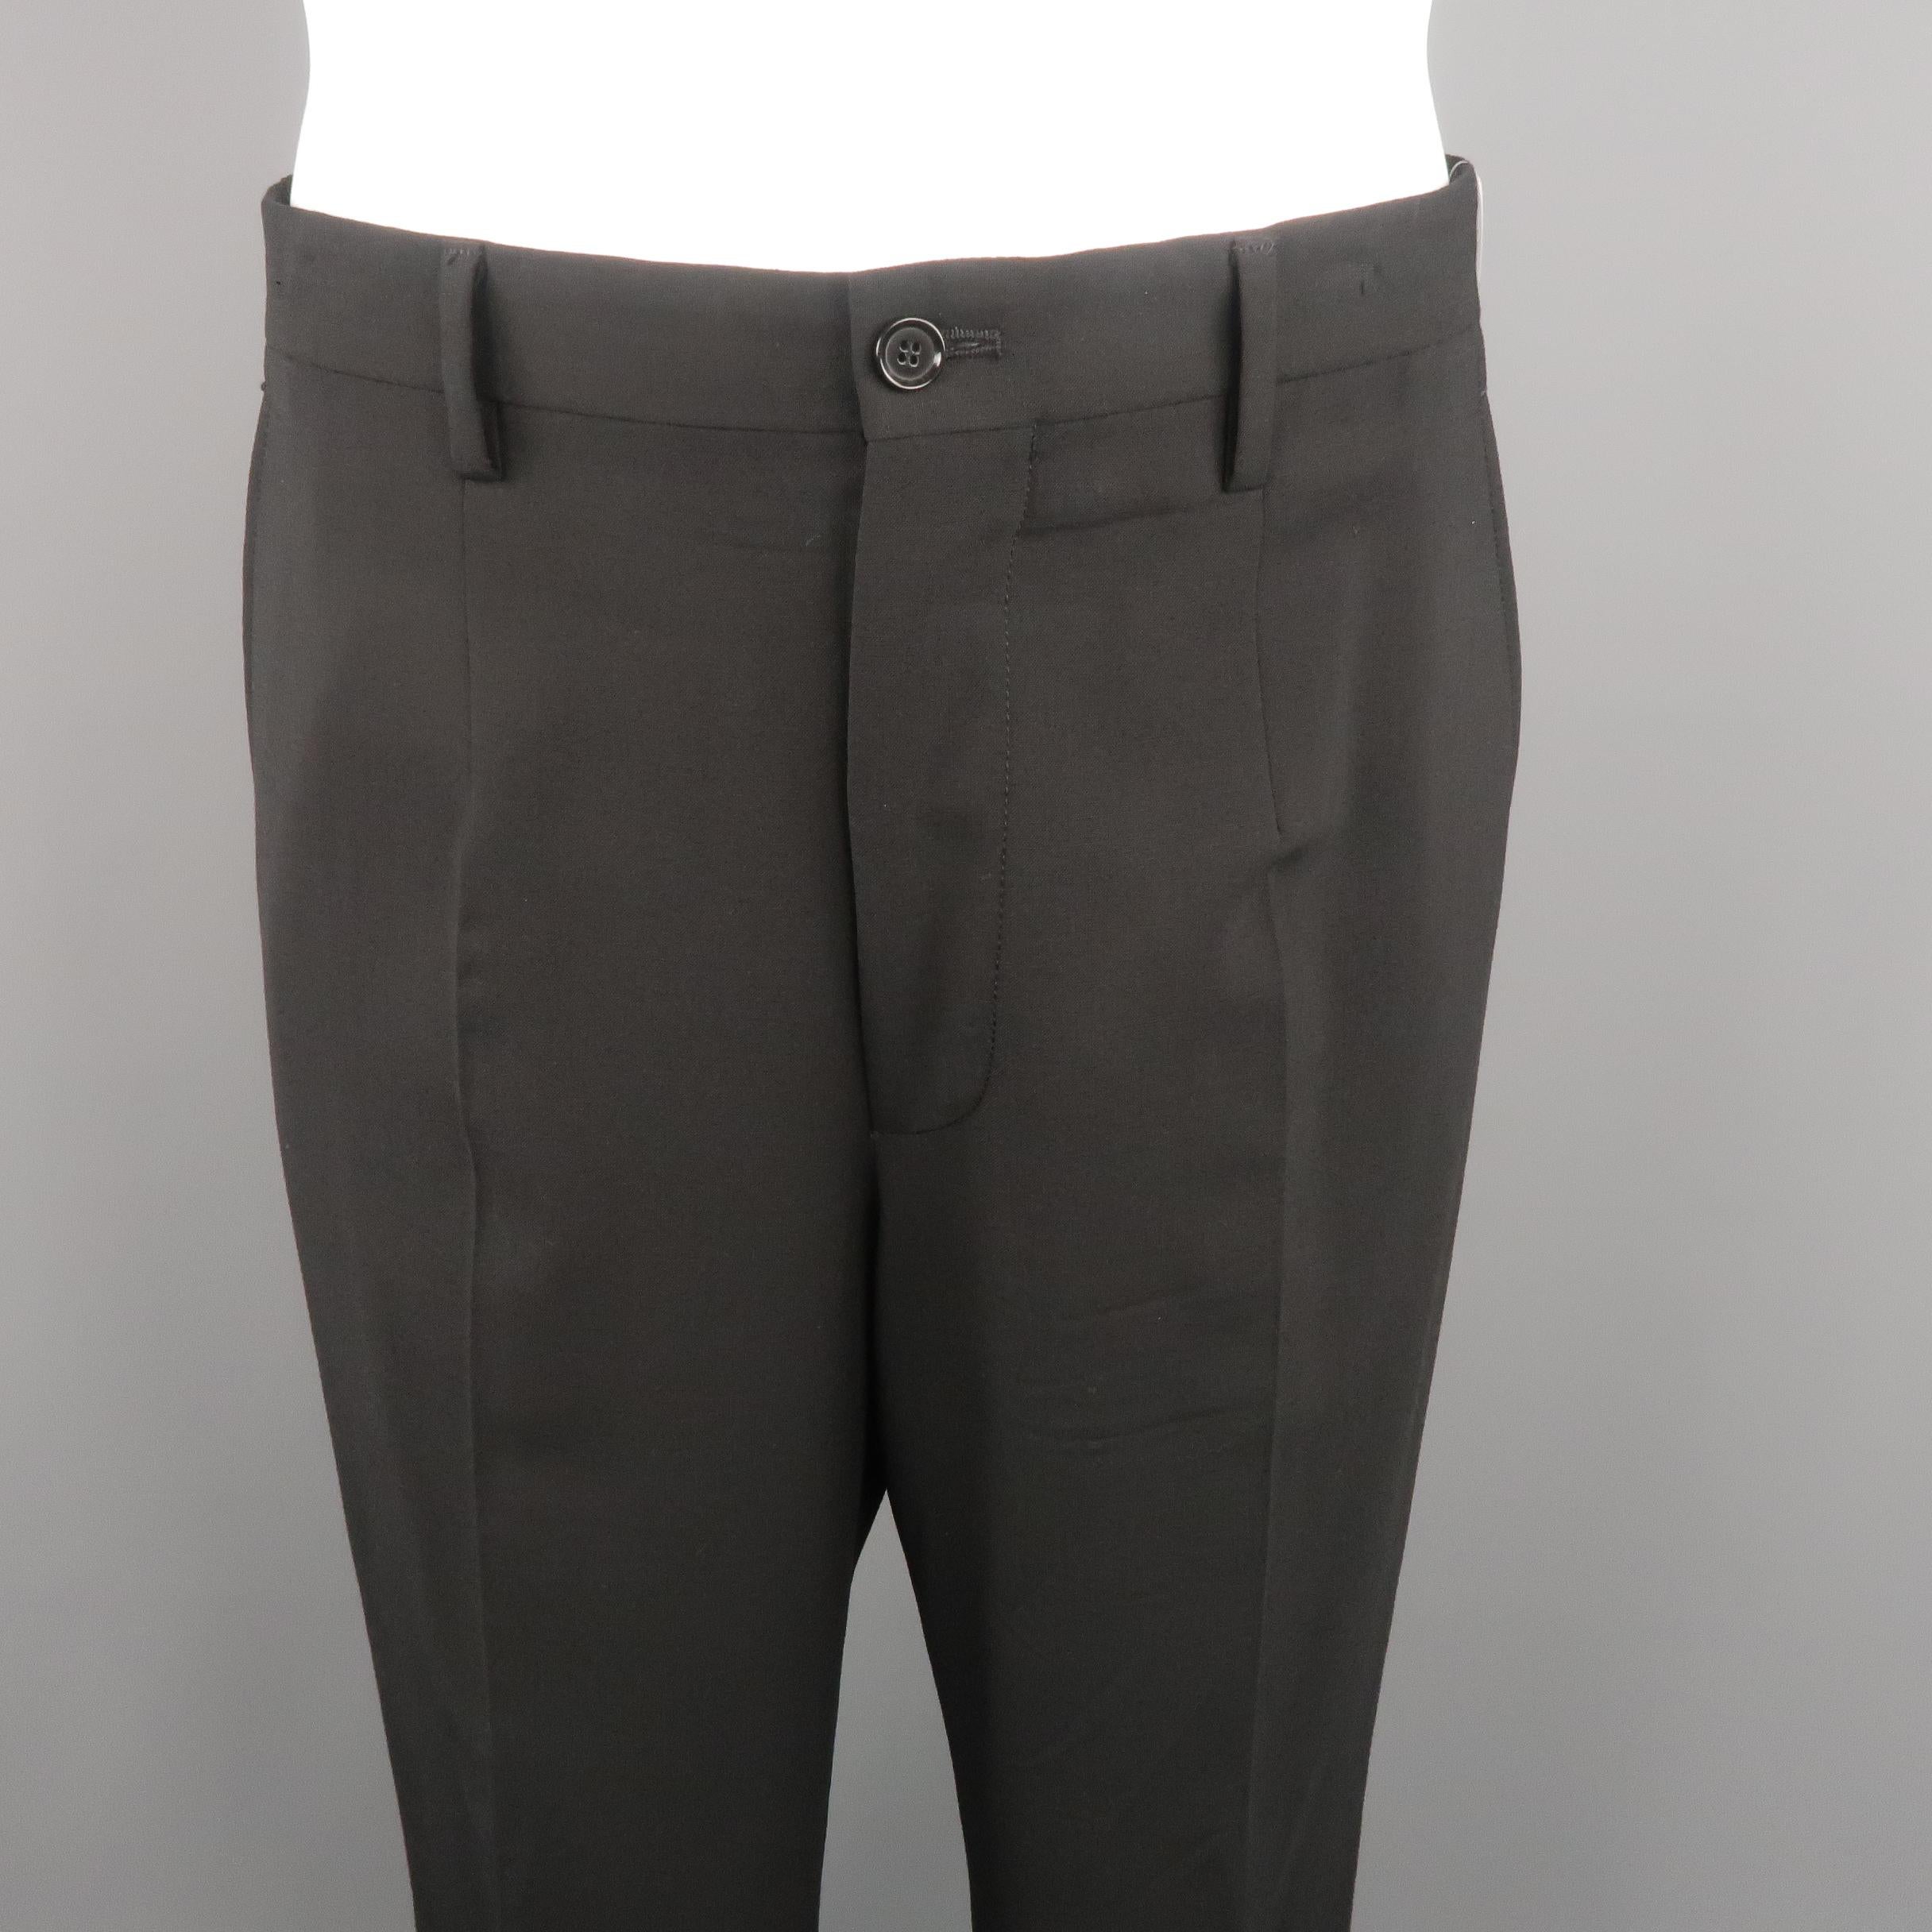 DOLCE & GABBANA dress pants come in black tone, solid wool blend material with slant side pockets and zip fly. Small signs of use, minor marks. Made in Italy.
 
Excellent Pre-Owned Condition.
Marked: 50 IT
 
Measurements:
 
Waist: 34 in.
Rise: 12